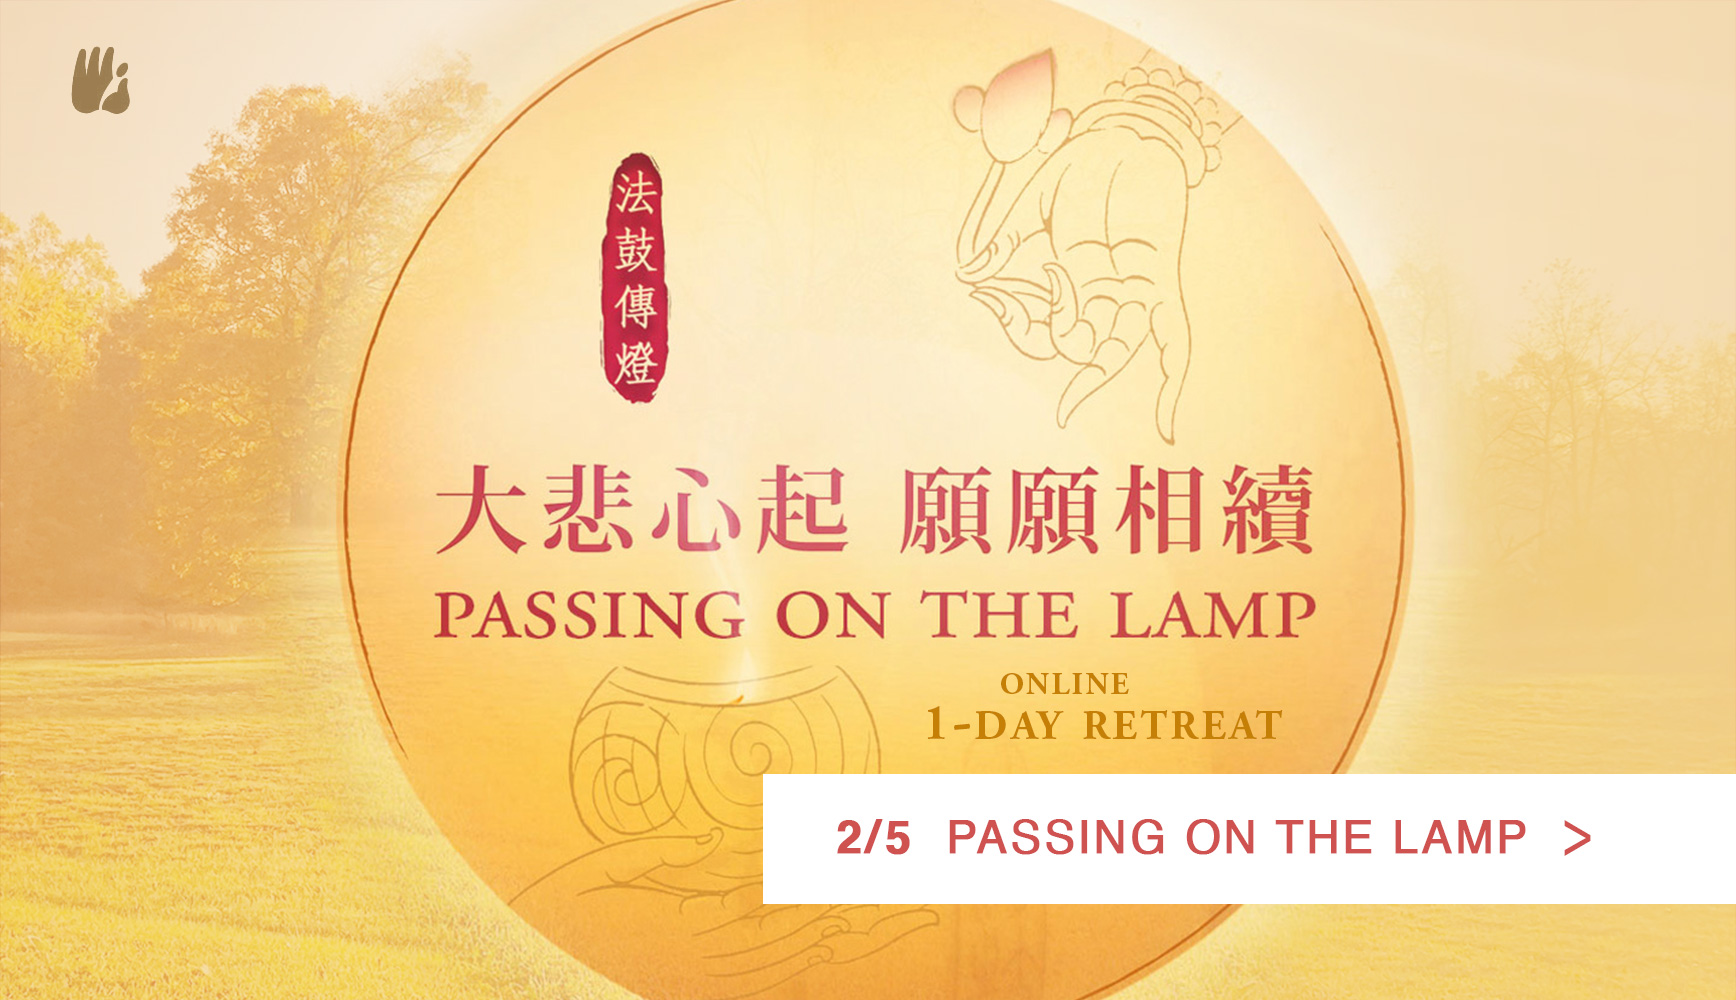 Passing on the Lamp online 1-Day Retreat